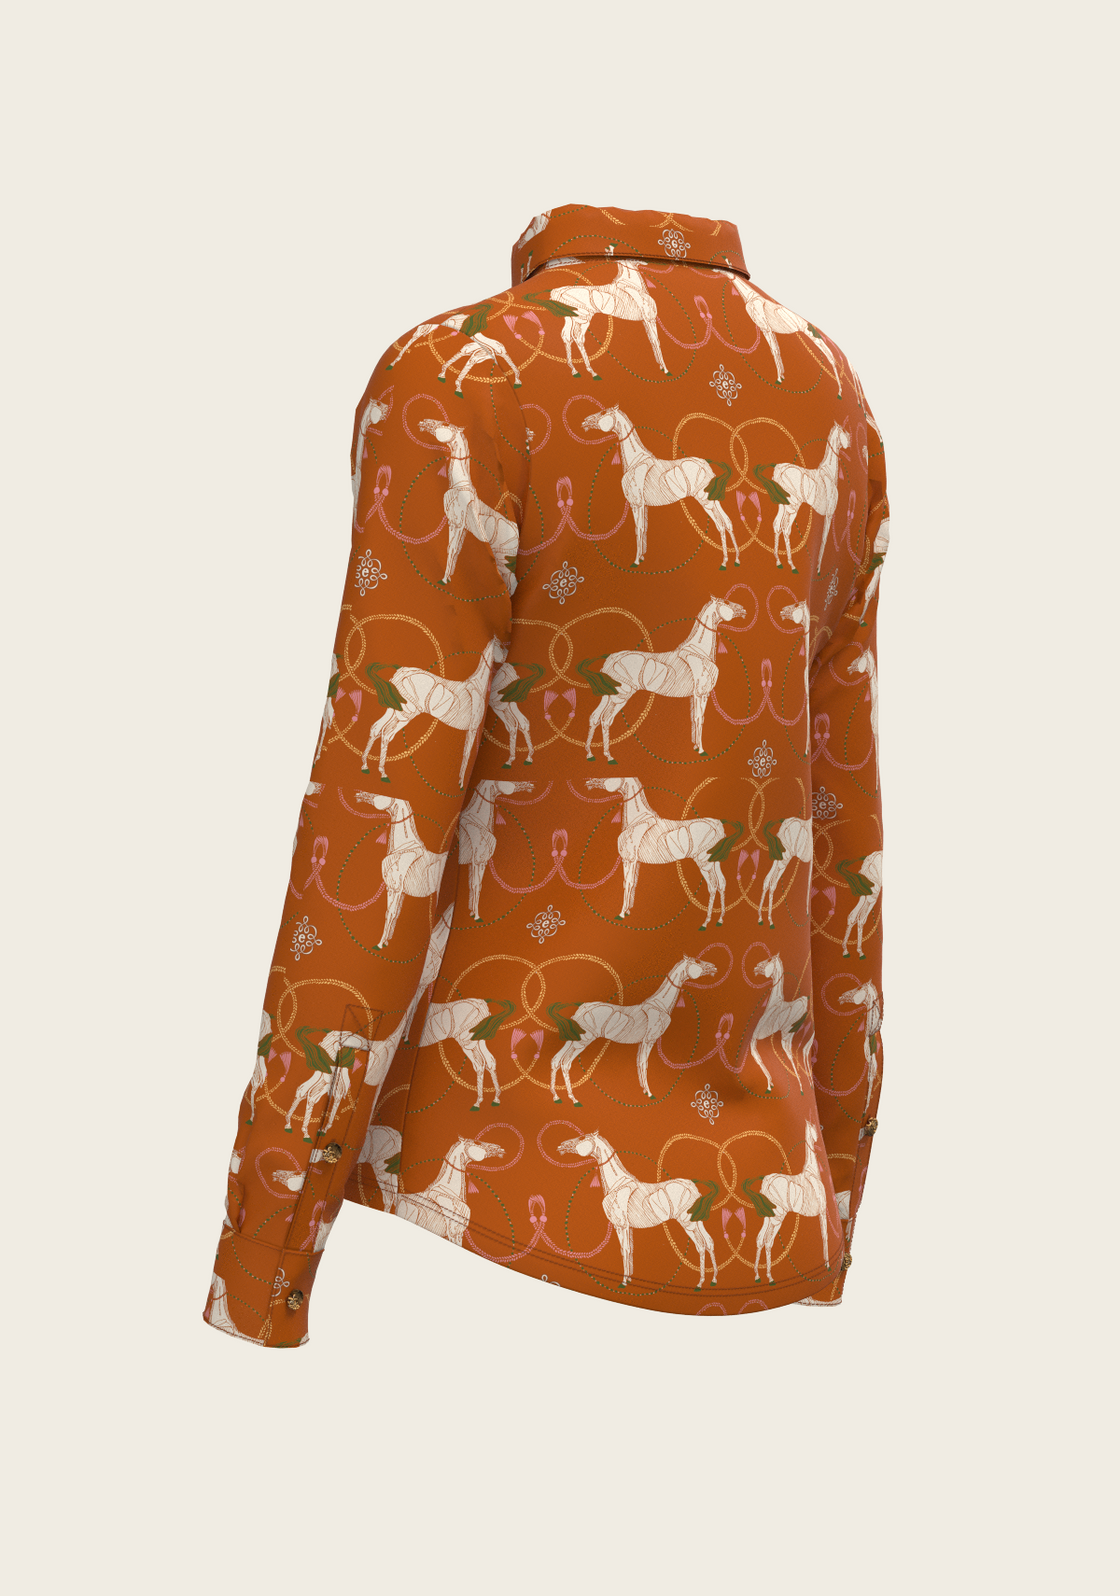 Roped Horses on Tan Ladies Button Shirt